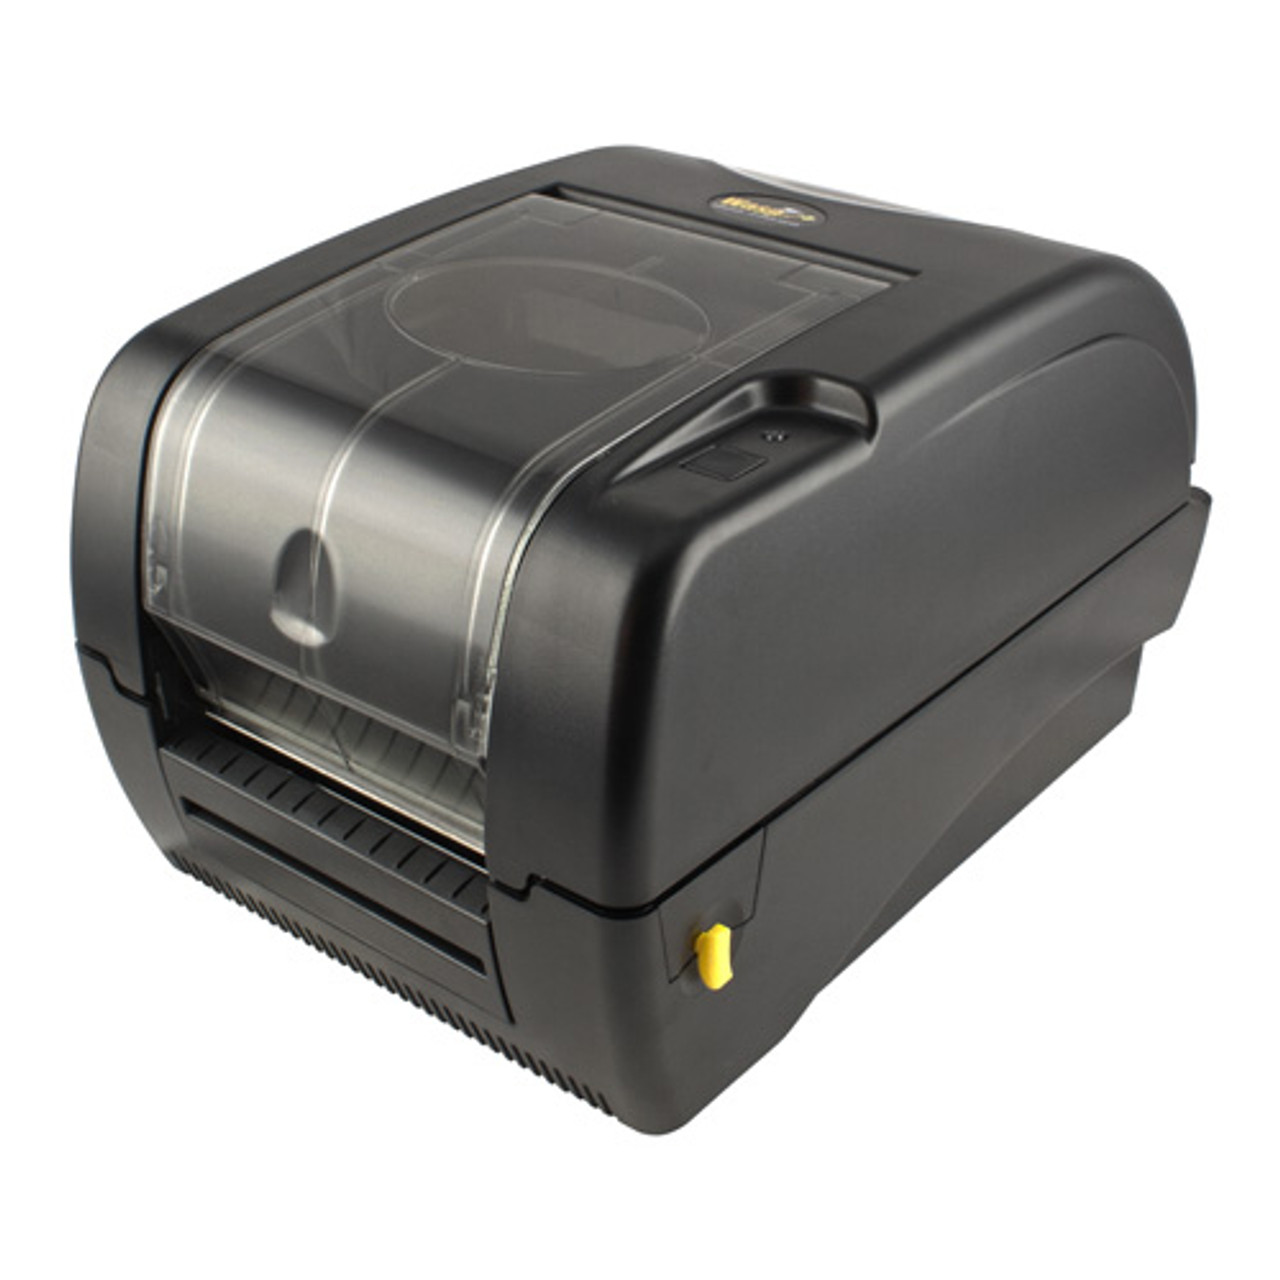 Wasp WPL305 Monochrome Direct Thermal Label Printer with Reflective Media Sensor, in s Print Speed, 203 dpi Print Resolution, 4.25 Print Width, 110  - 5